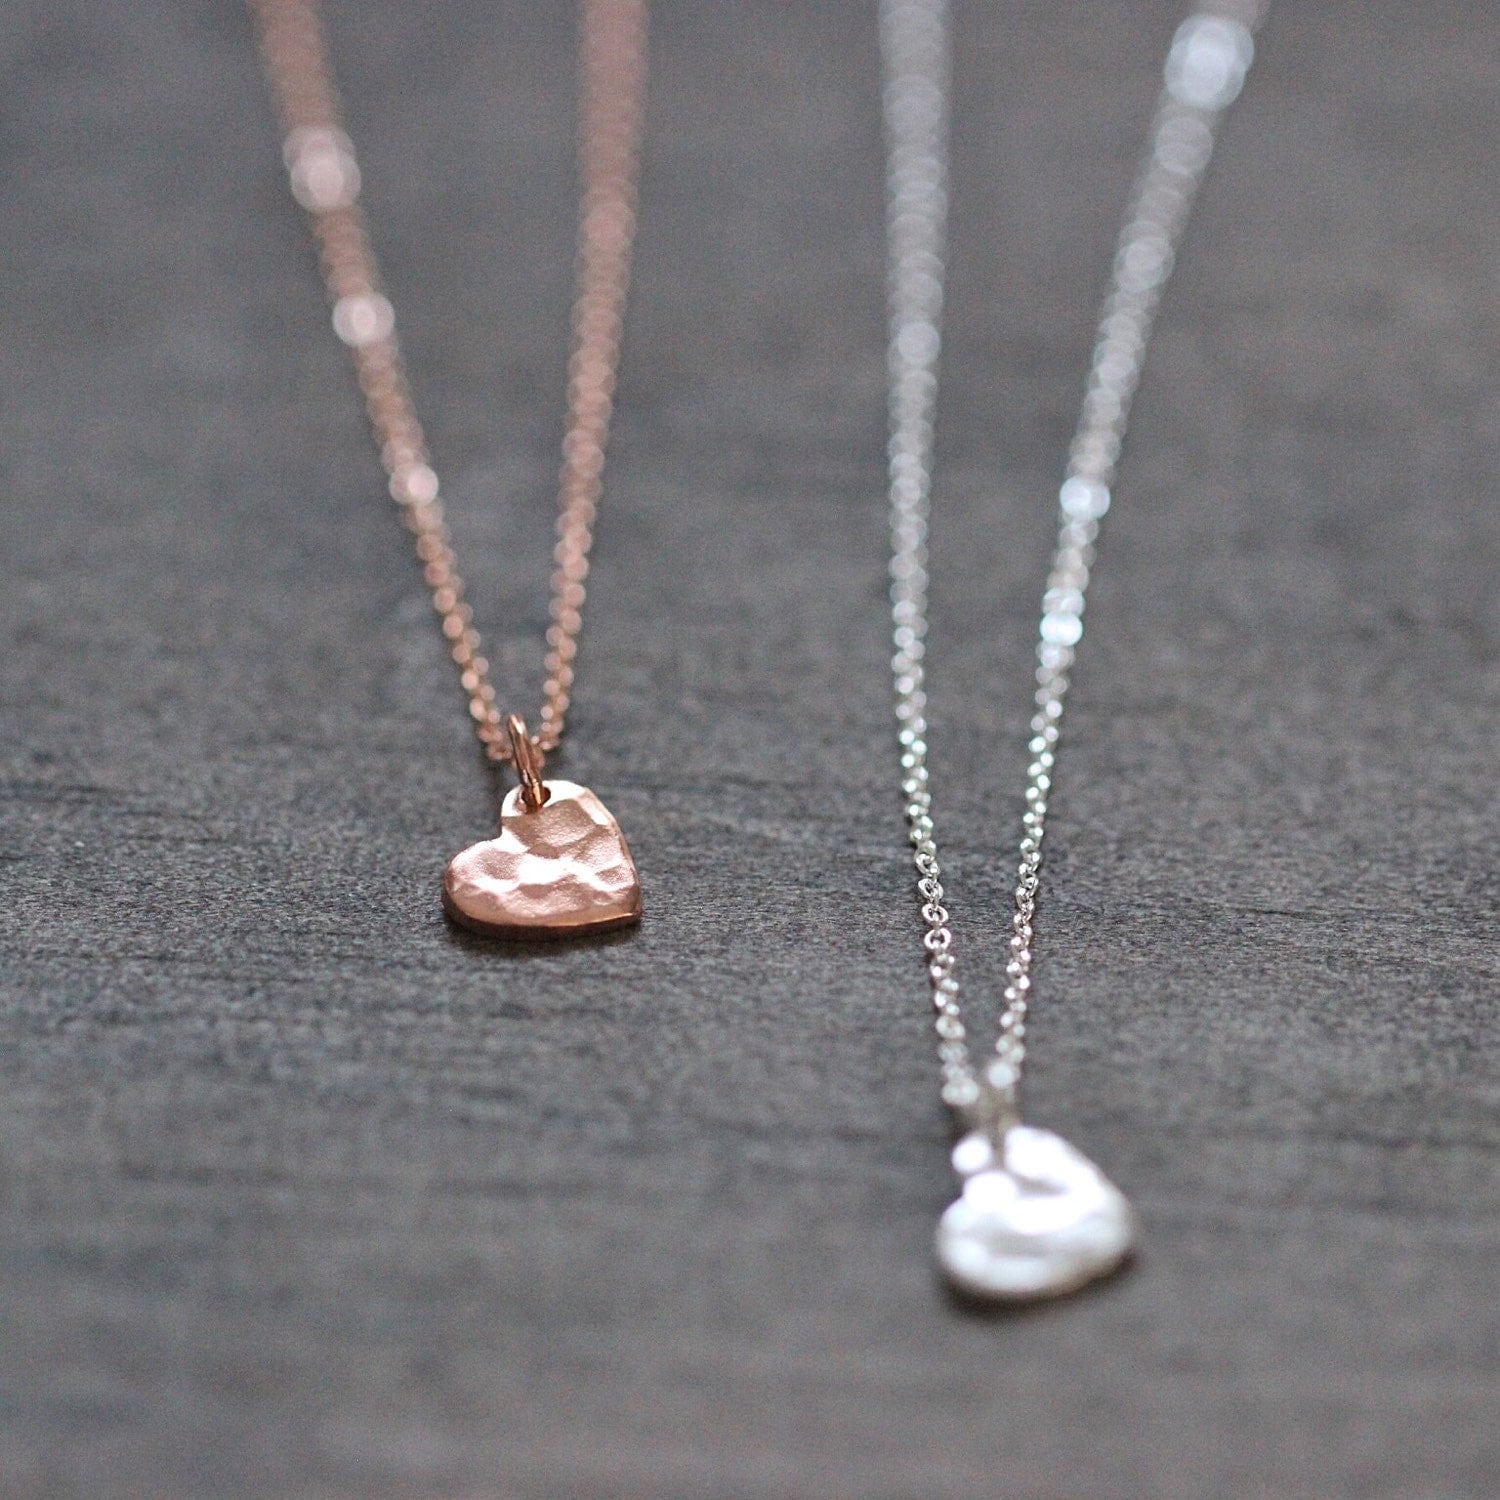 heartbeat necklace rose gold